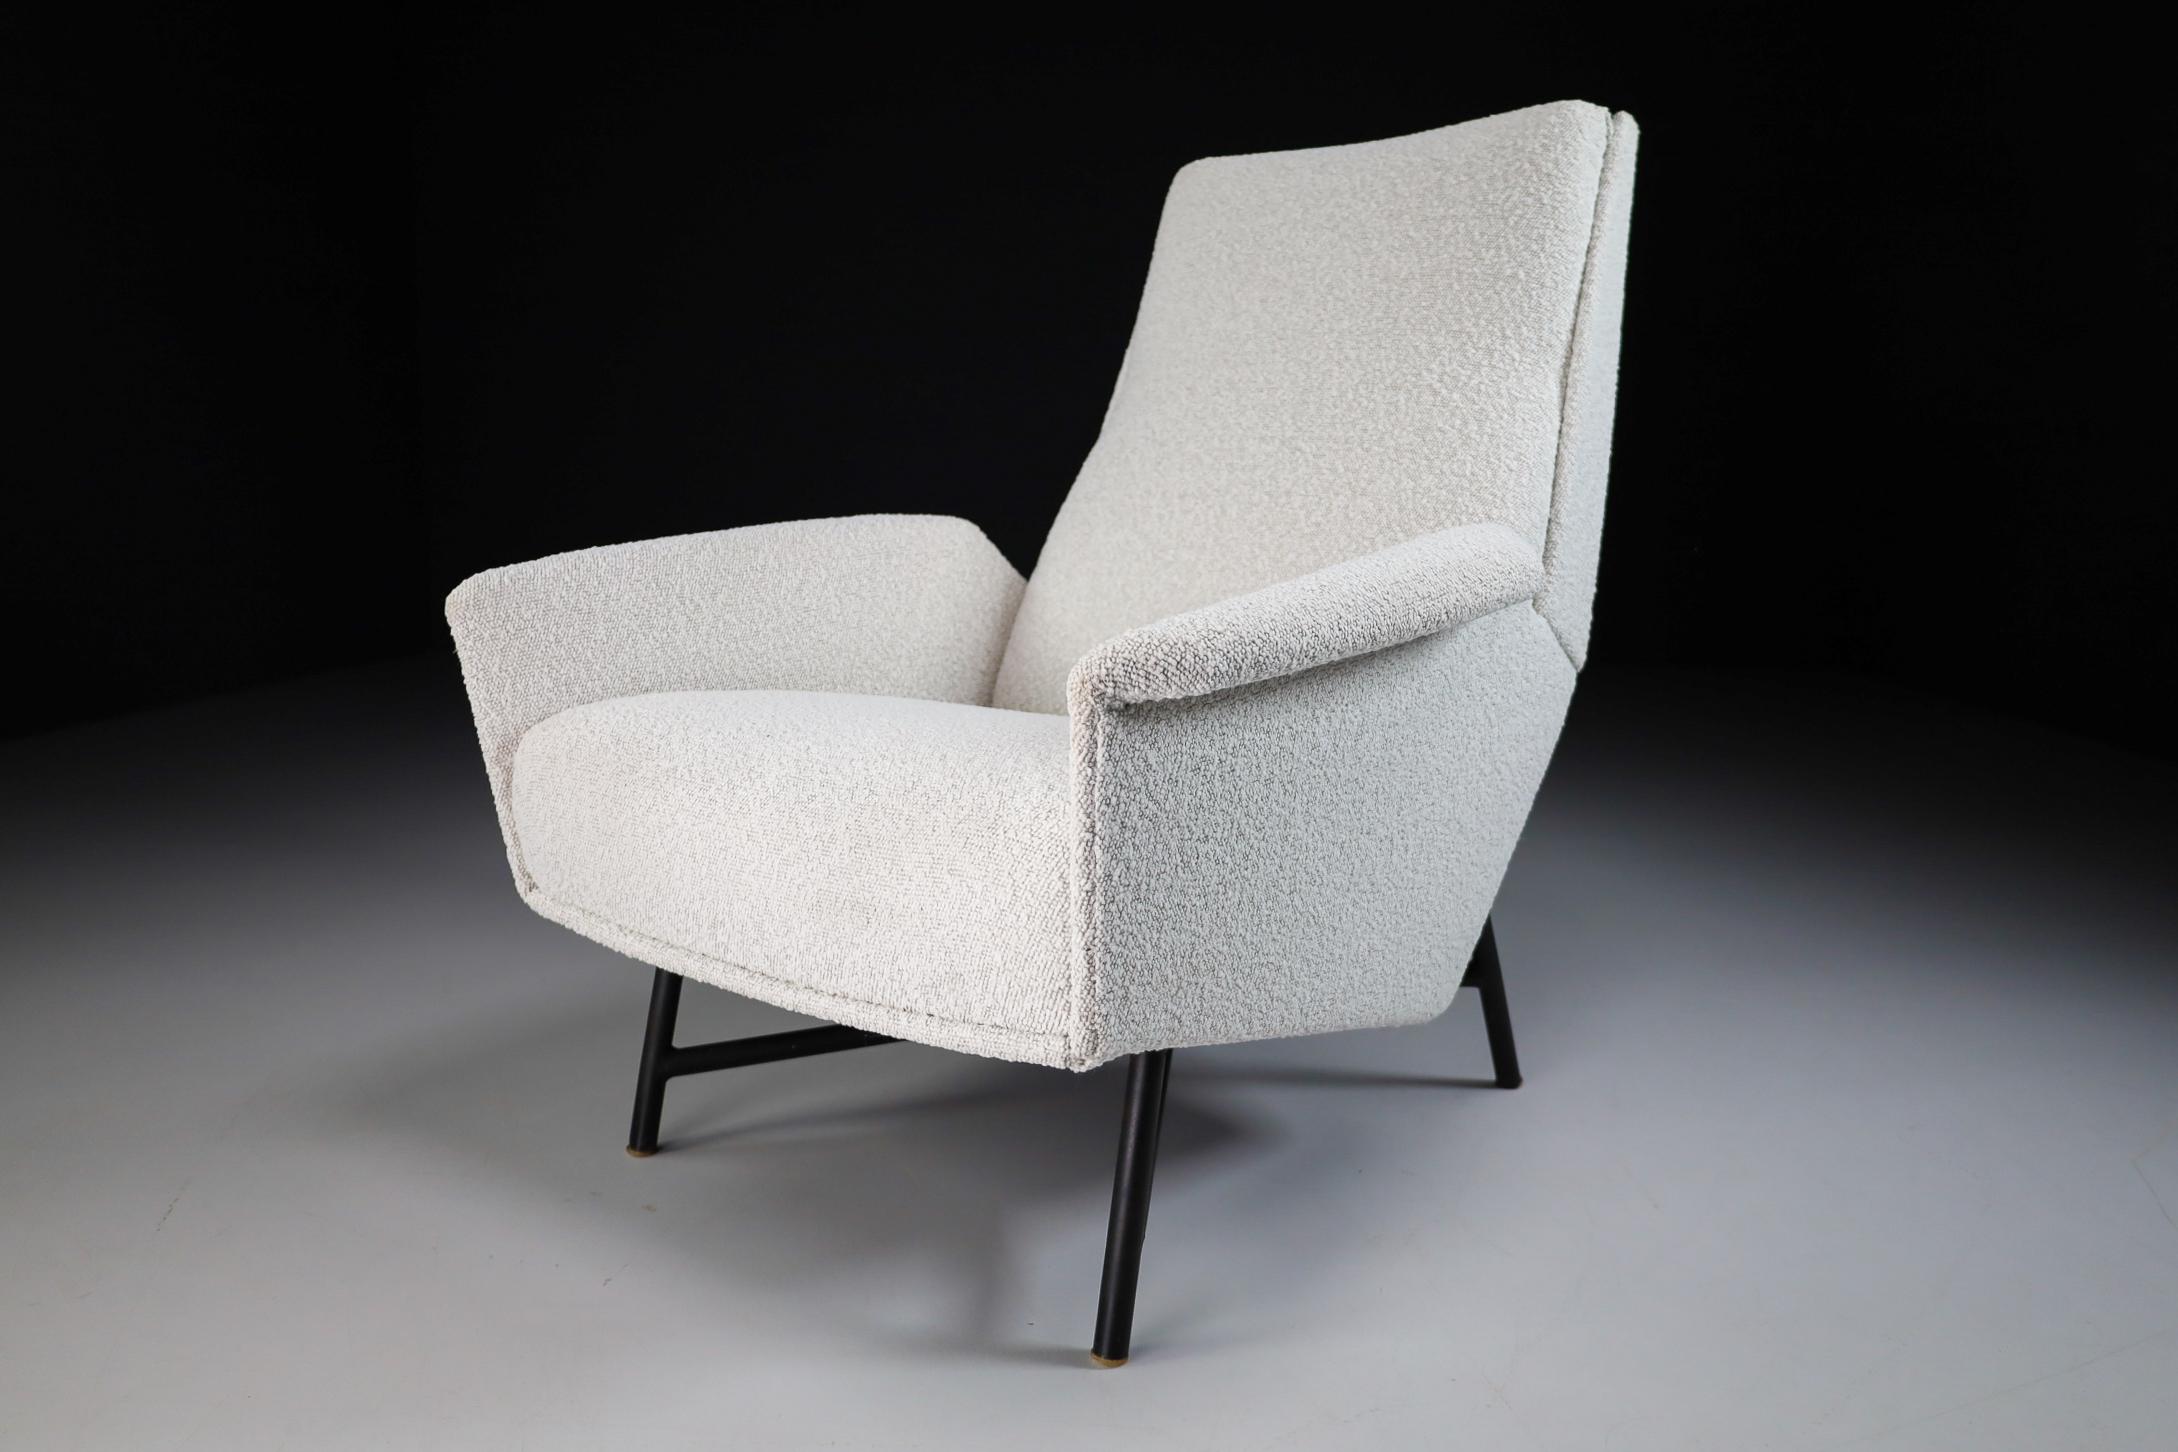 Mid-Century Modern Midcentury Modern Lounge Chair in Re Upholstered Boucle Wool by Guy Besnard 1959 For Sale